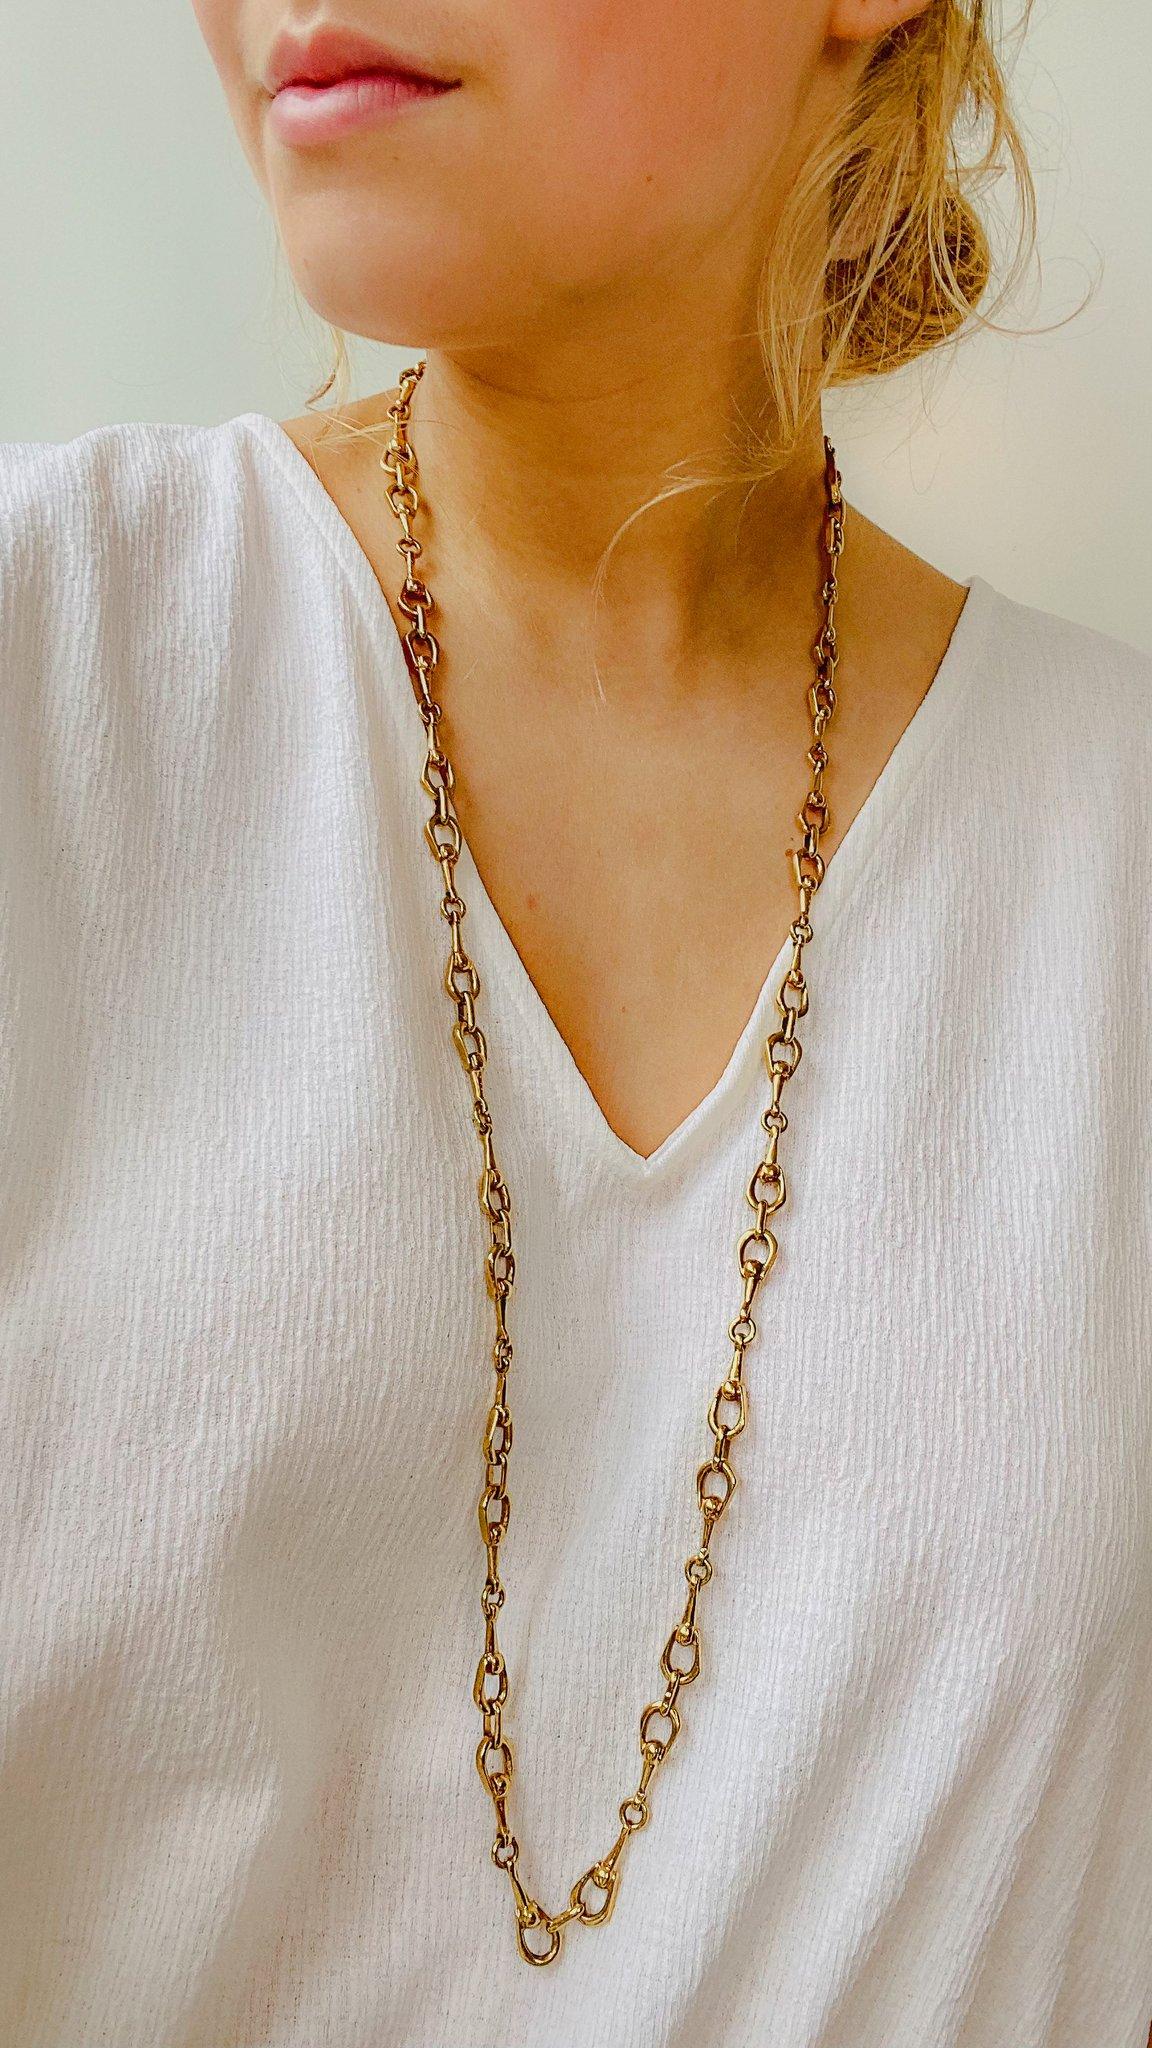 Celine 1980s Vintage Necklace
Super versatile long horsebit chain from the Celine 80s archive
A super versatile piece that will see you through the year day and night. Throw over tees and summer dresses for a laid back luxe feel

Detail
-Made in